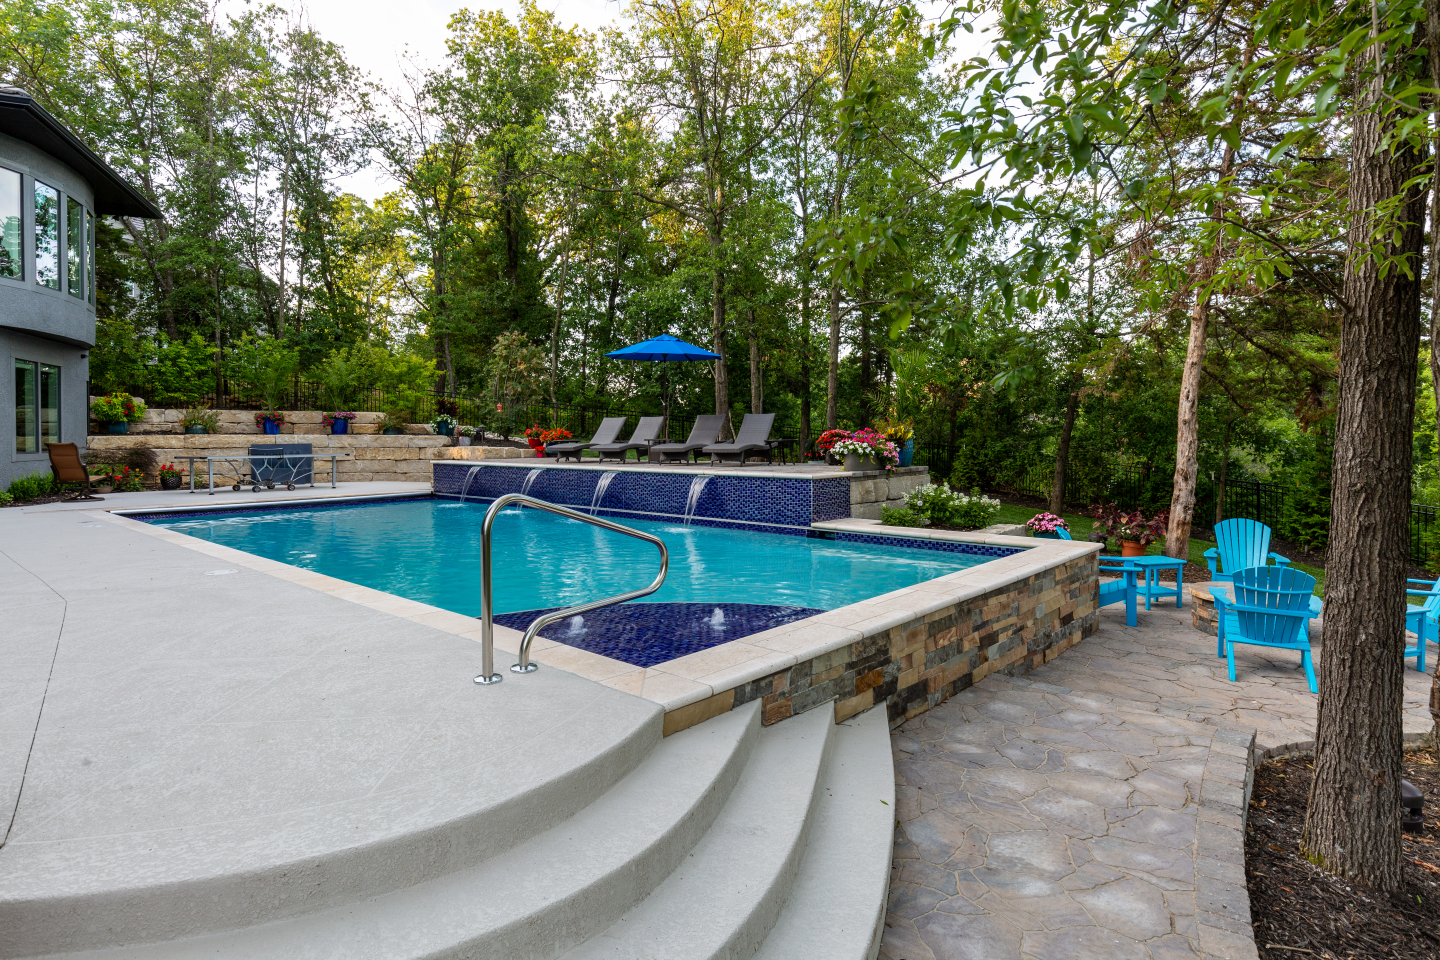 Outdoor pool with waterfalls and ping-pong table